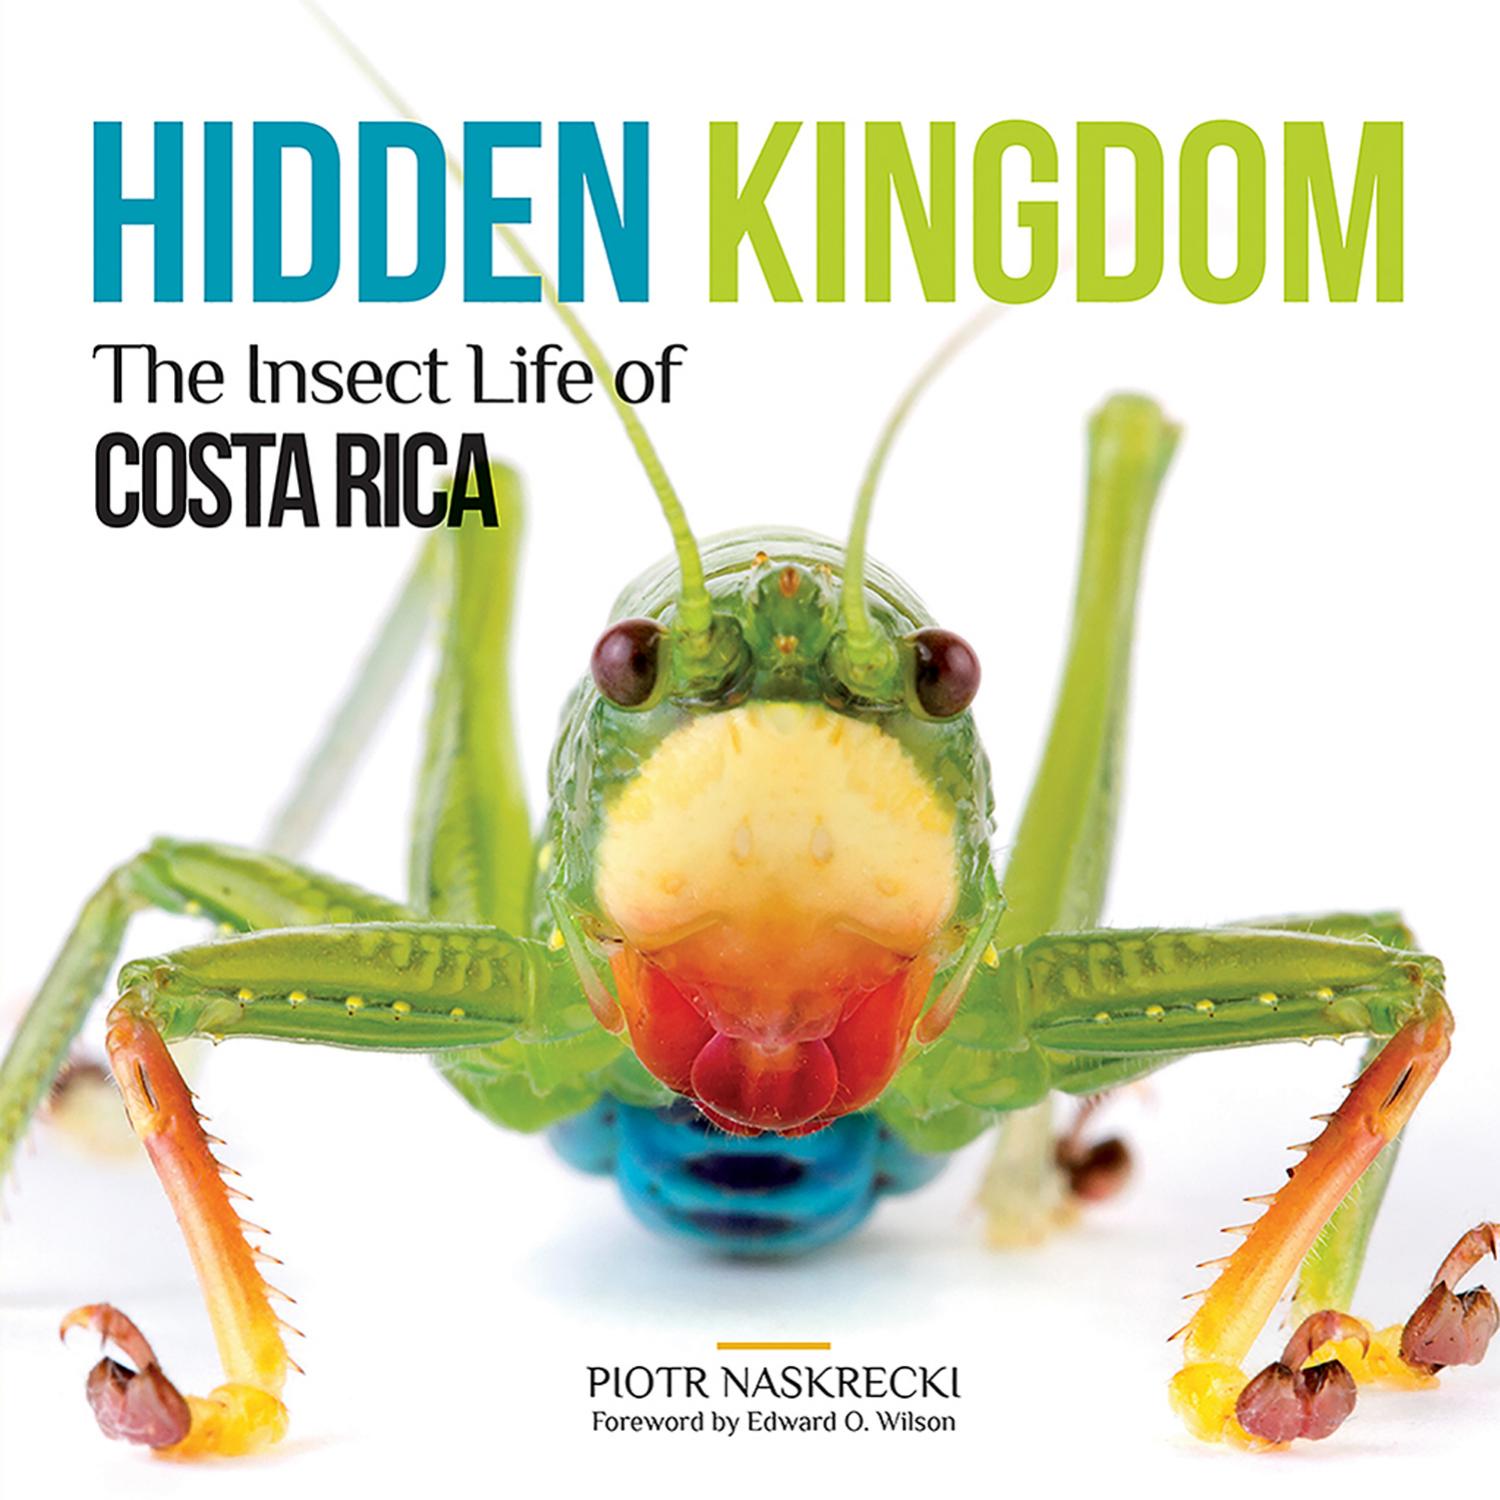 Hidden Kingdom: The Insect Life of Costa Rica by Piotr Naskrecki foreword by Edward O. Wilson